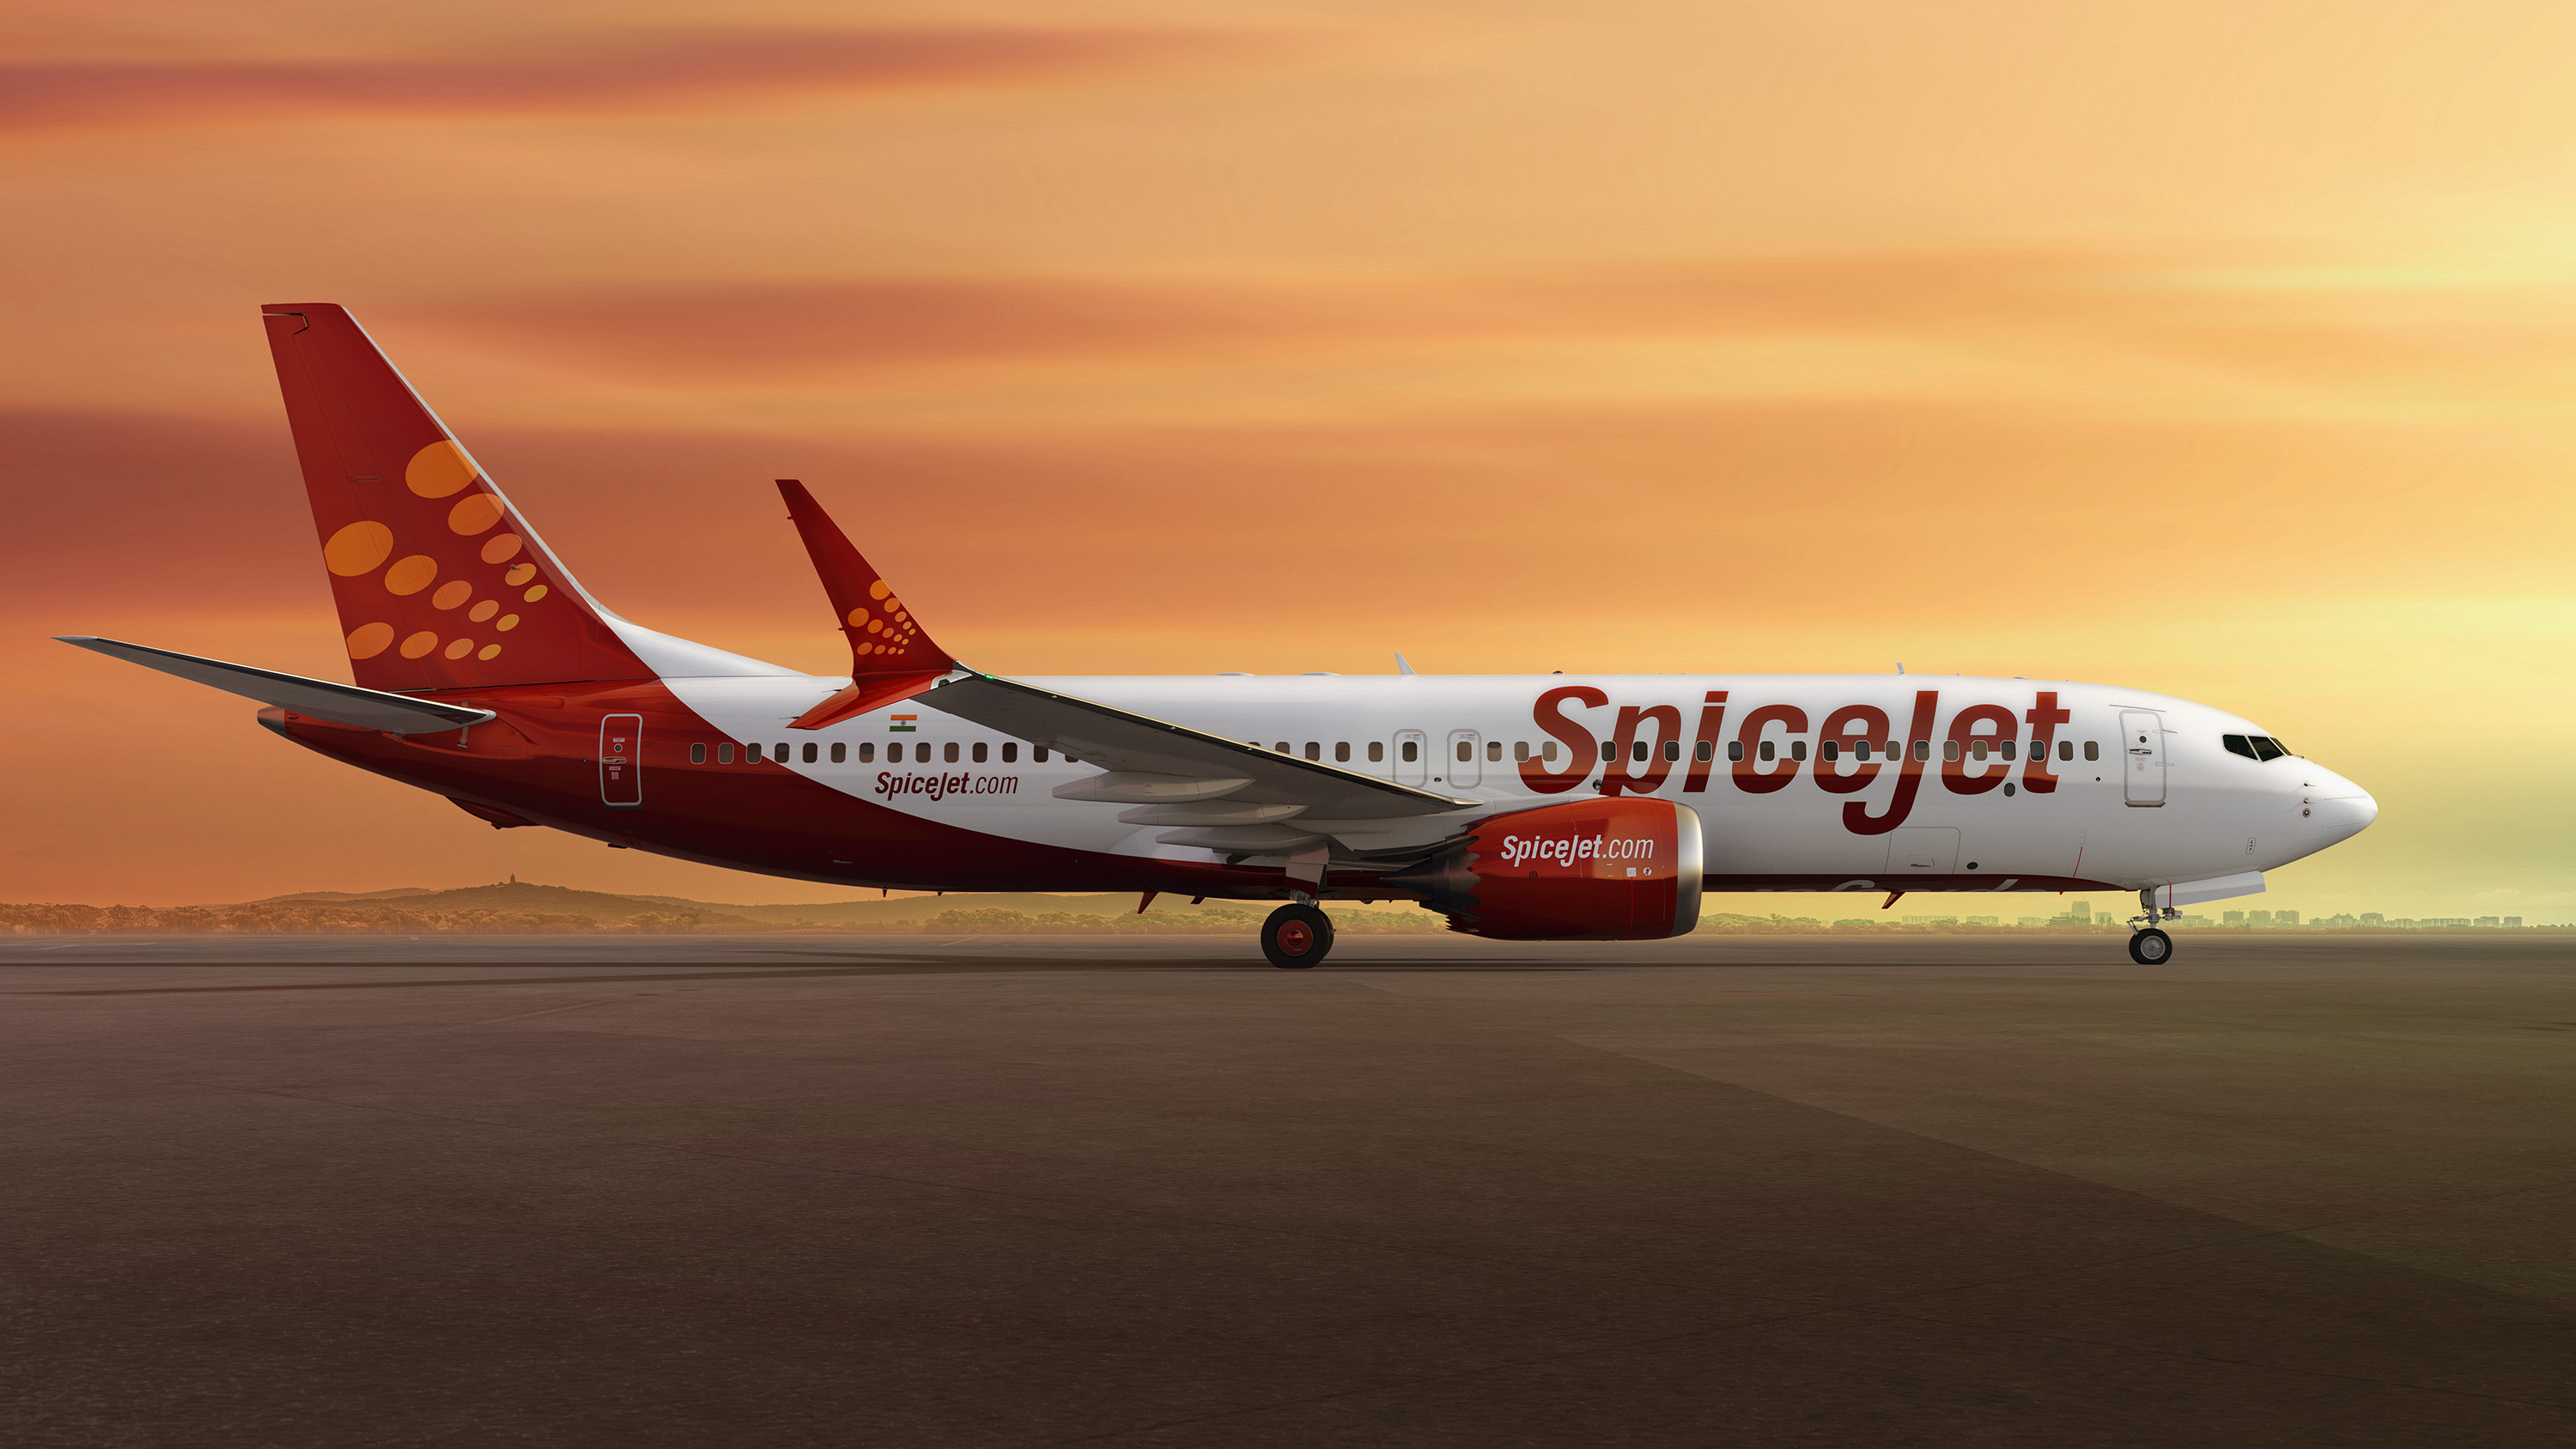 SpiceJet forms interline agreement with Hahn Air